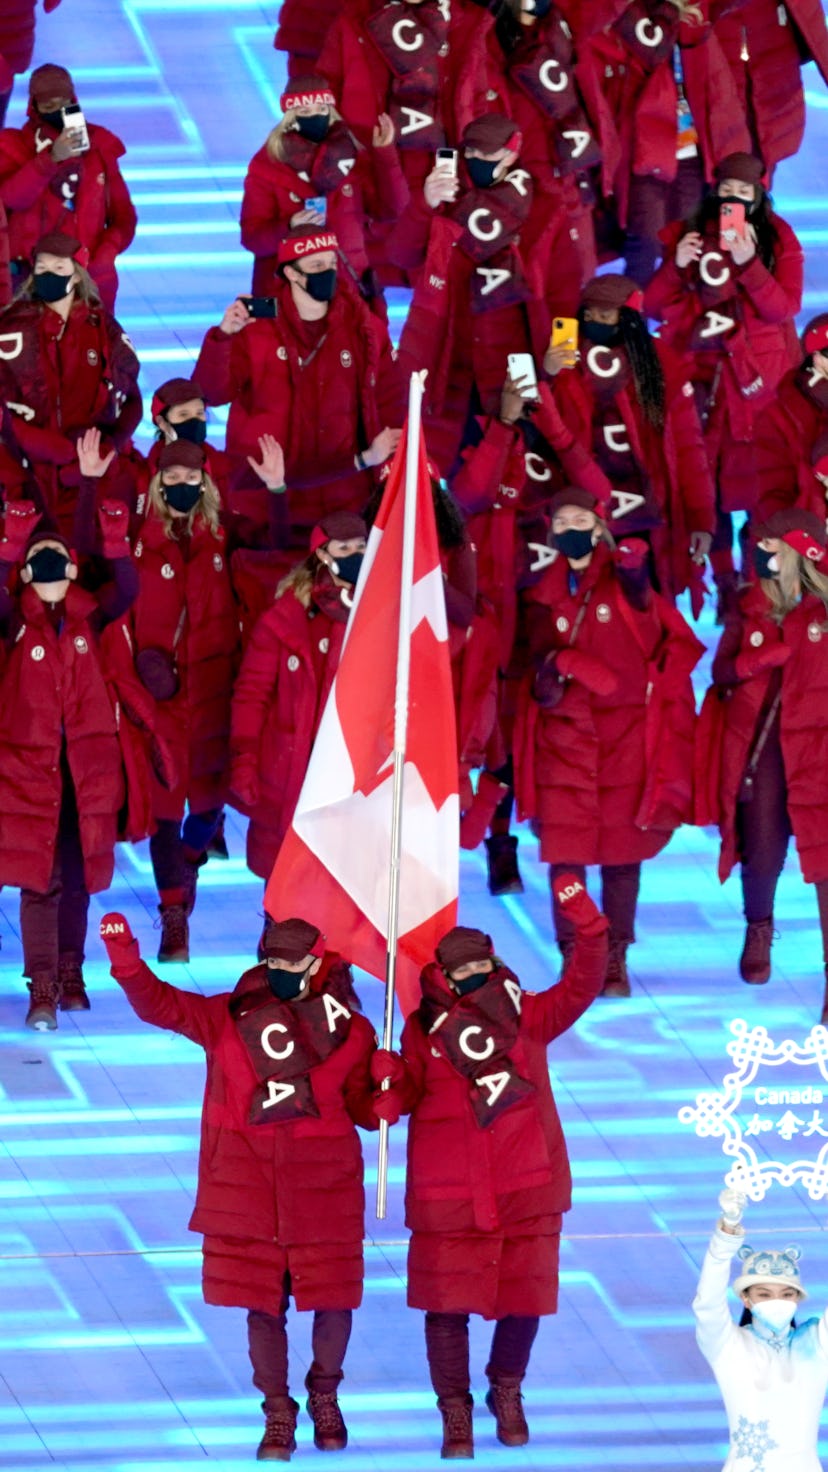 Canada’s 2022 Olympics opening ceremony outfit is monochrome red.